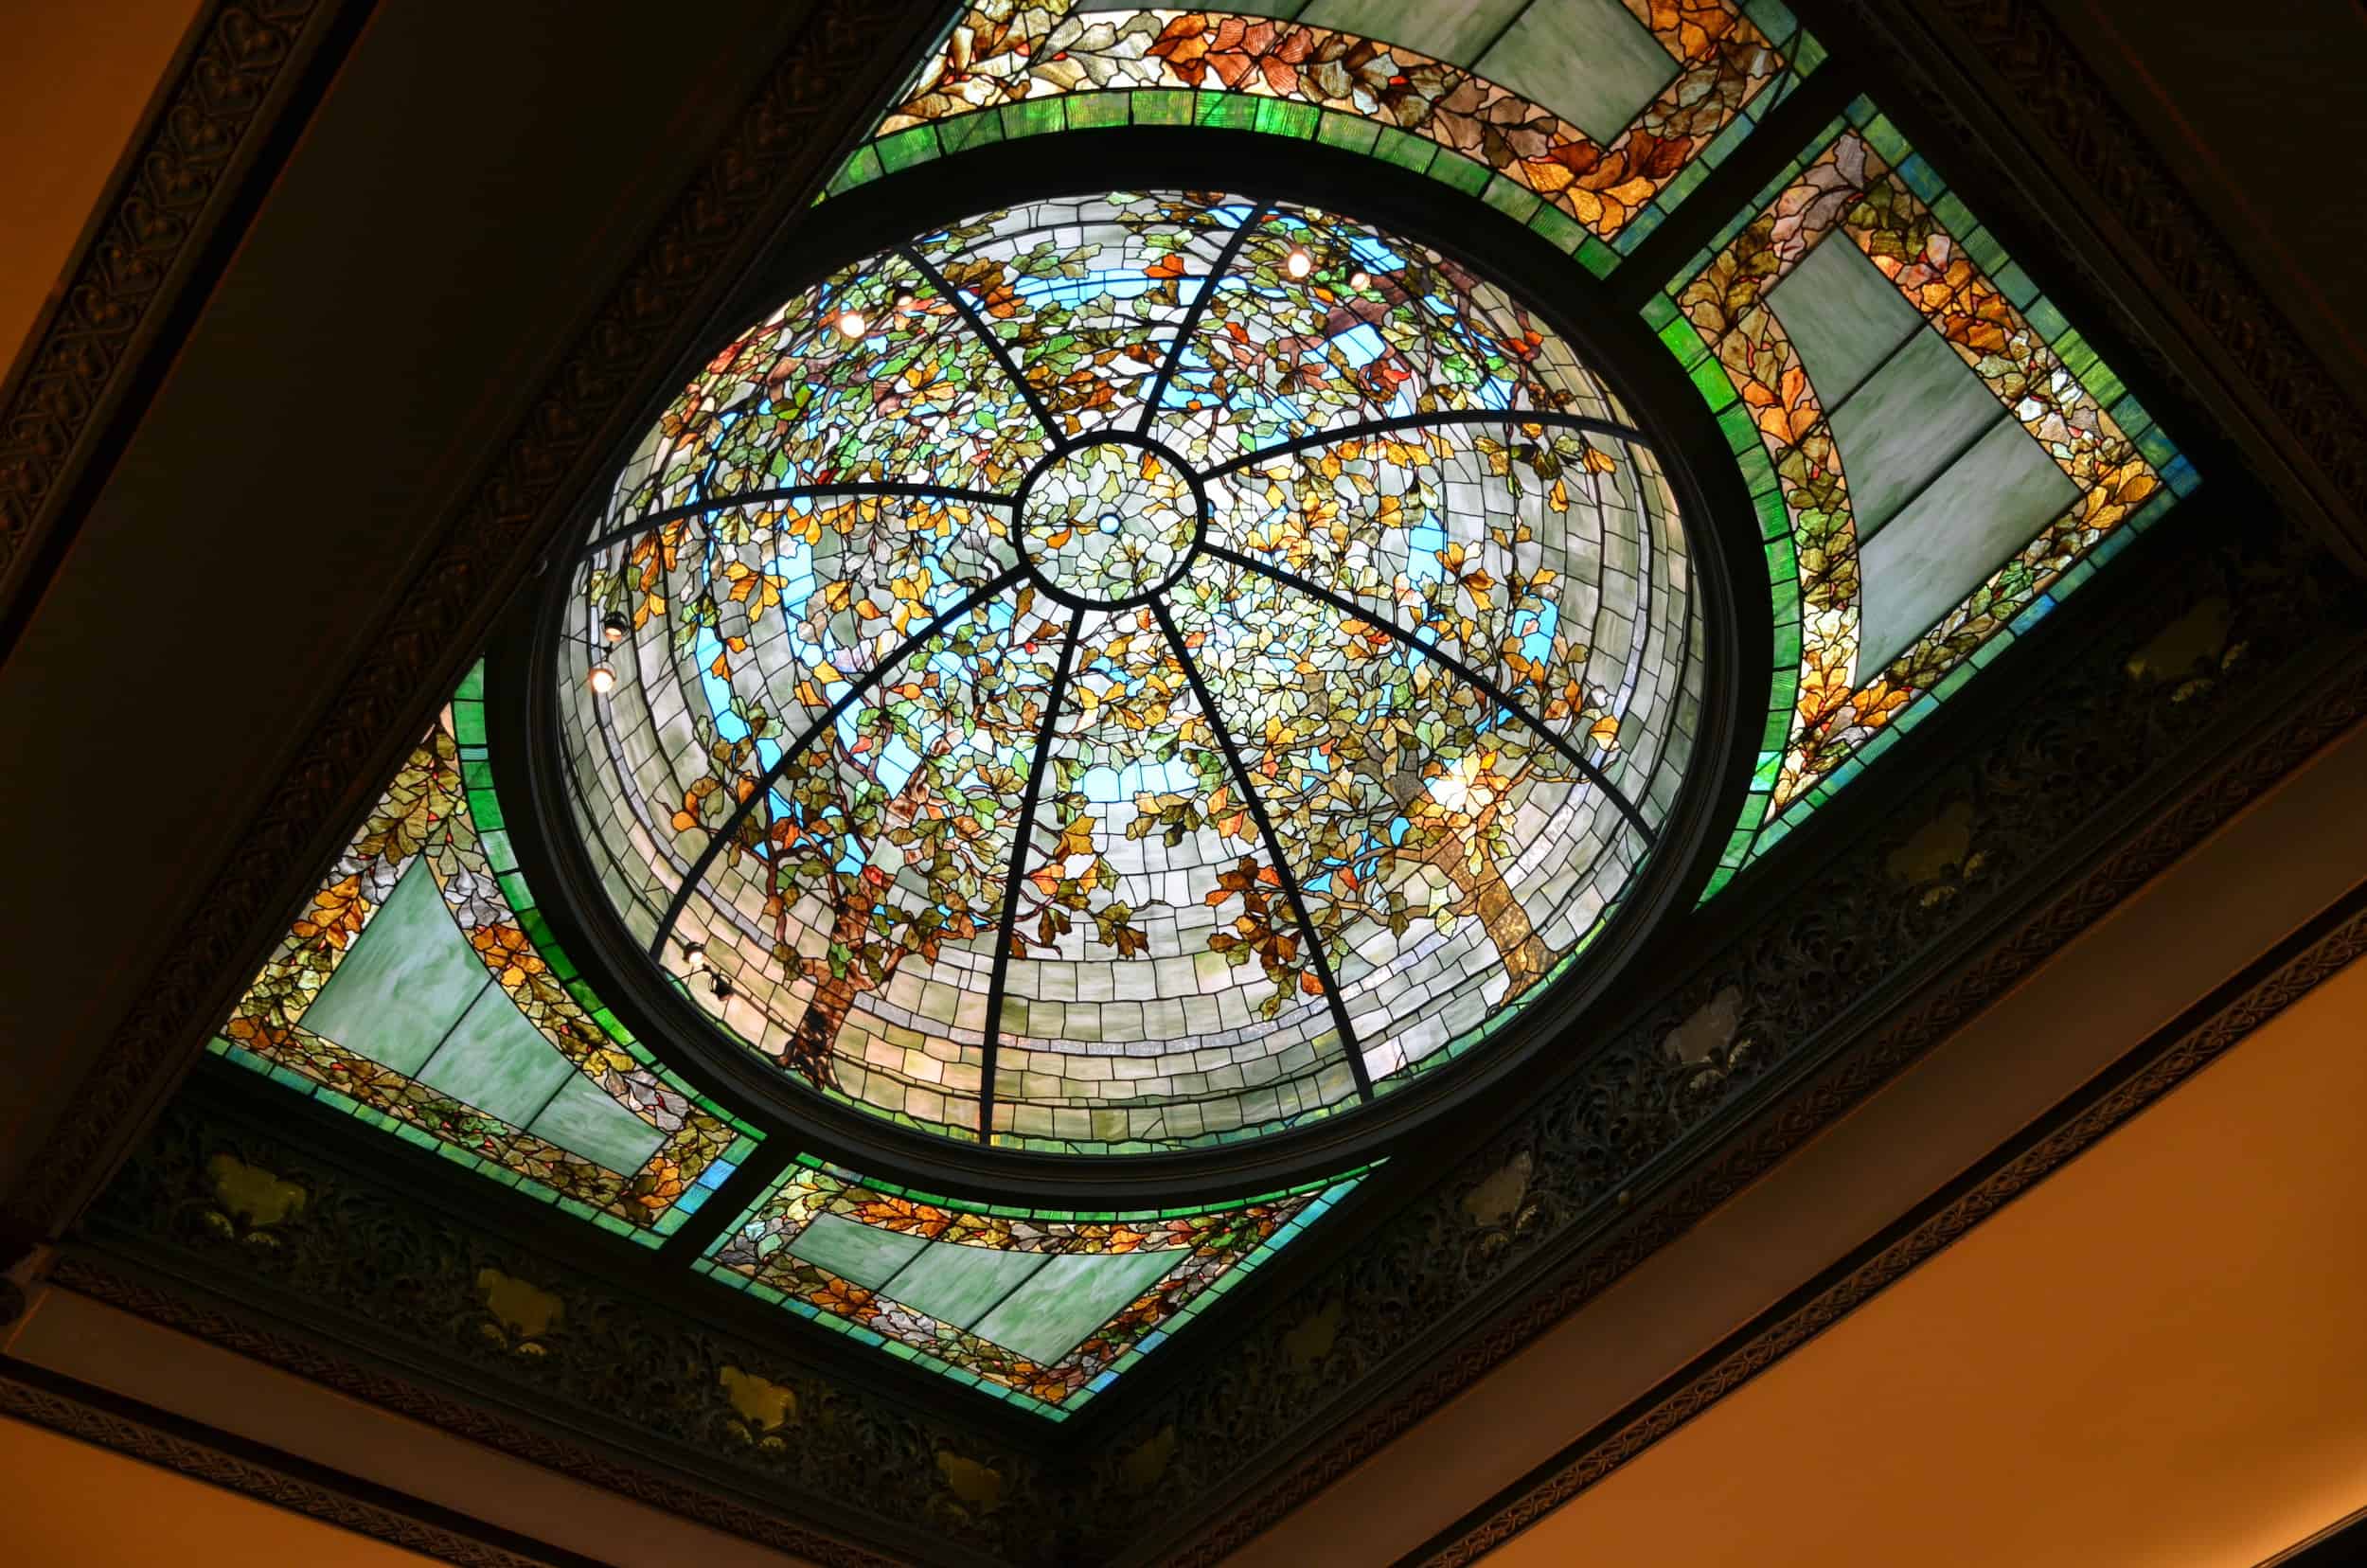 Stained glass dome skylight at the Nickerson House (Driehaus Museum) in River North, Chicago, Illinois